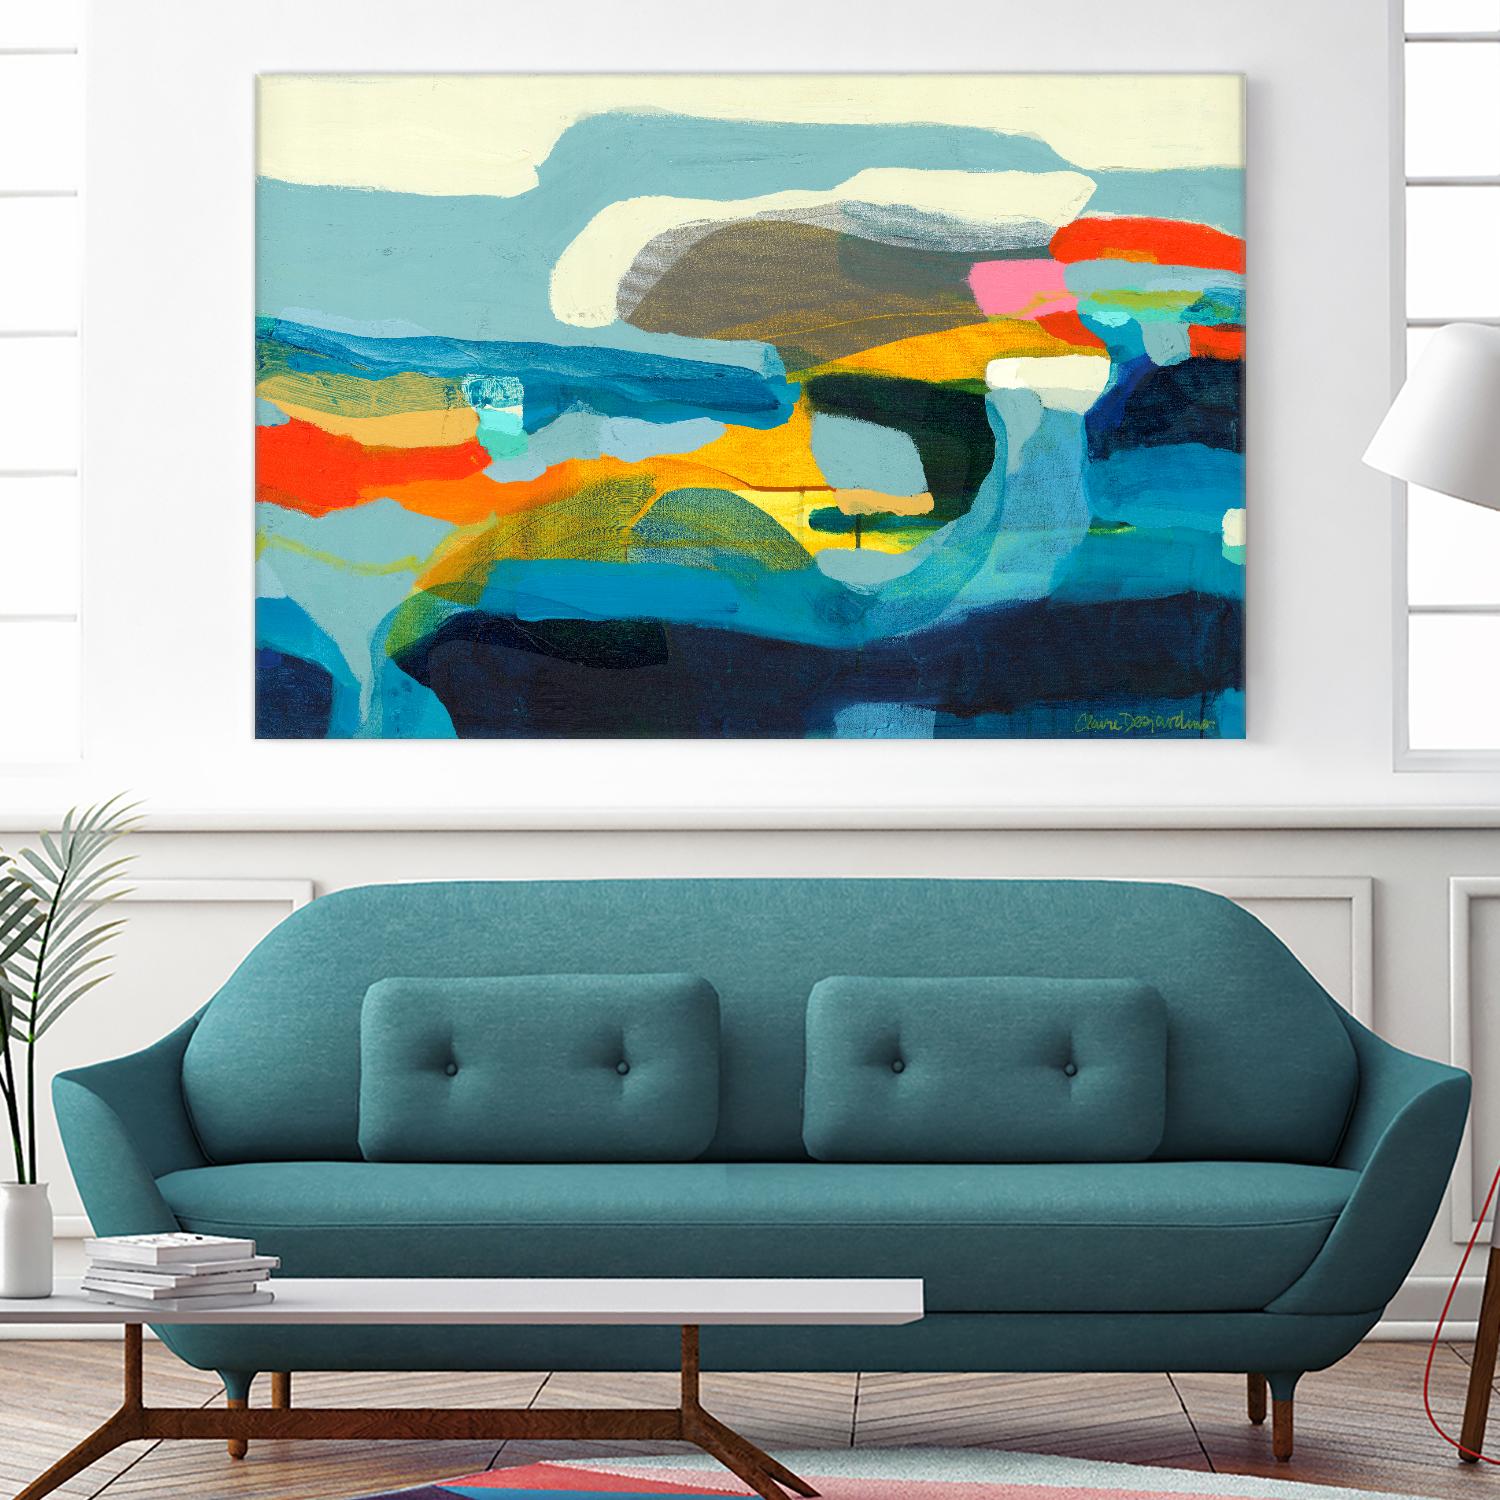 The Ebb and flow of seasons - Art Print by Claire Desjardins | GIANT ART